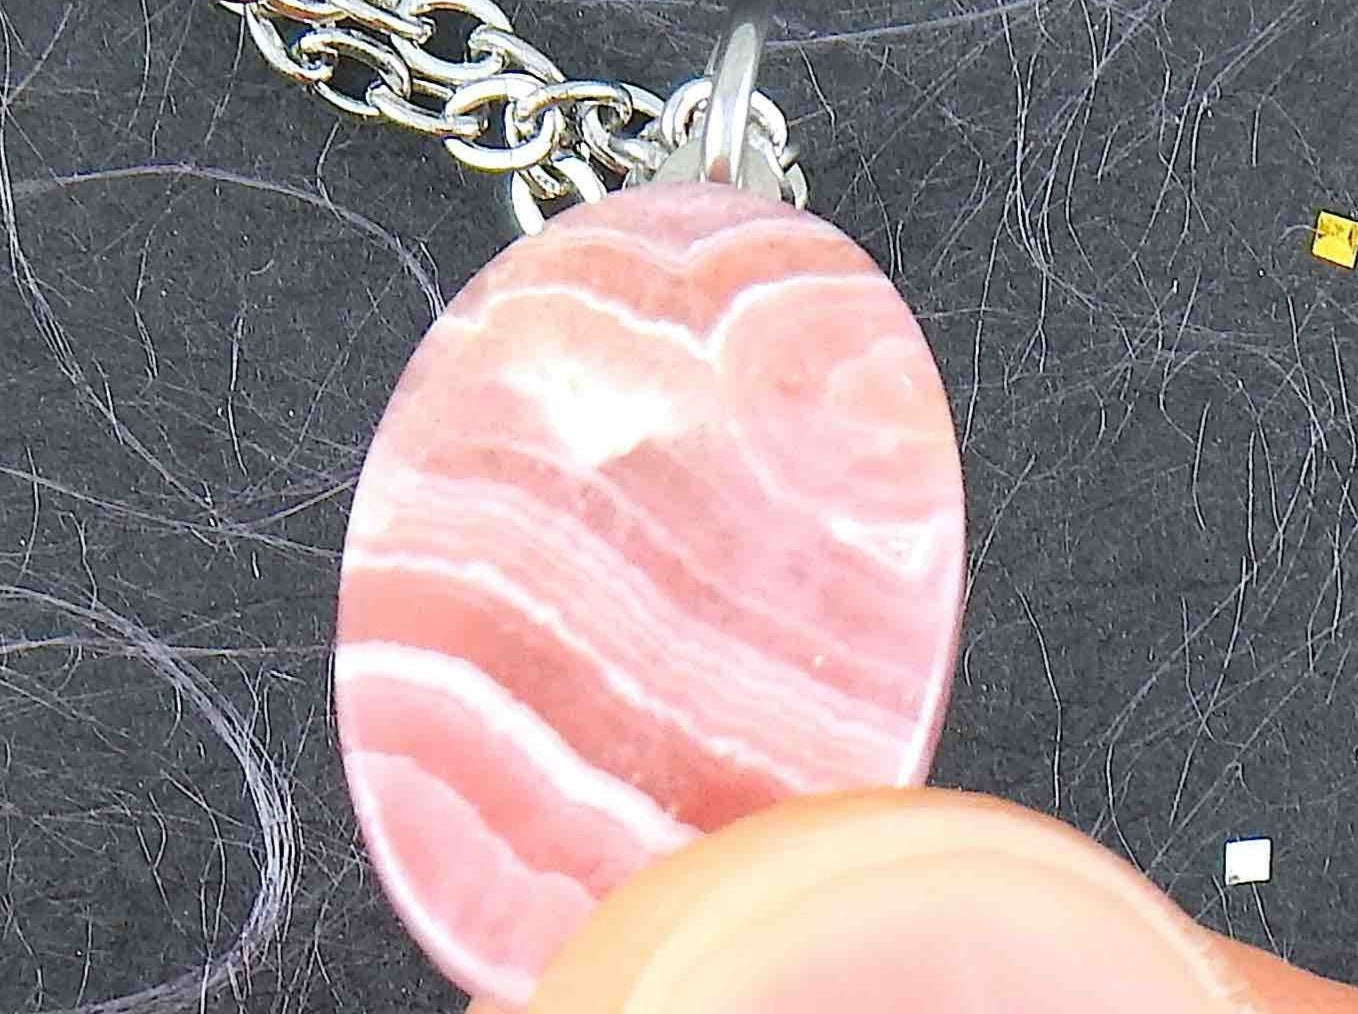 16-inch necklace with oval marbled pink-white rhodocrosite stone pendant, stainless steel chain